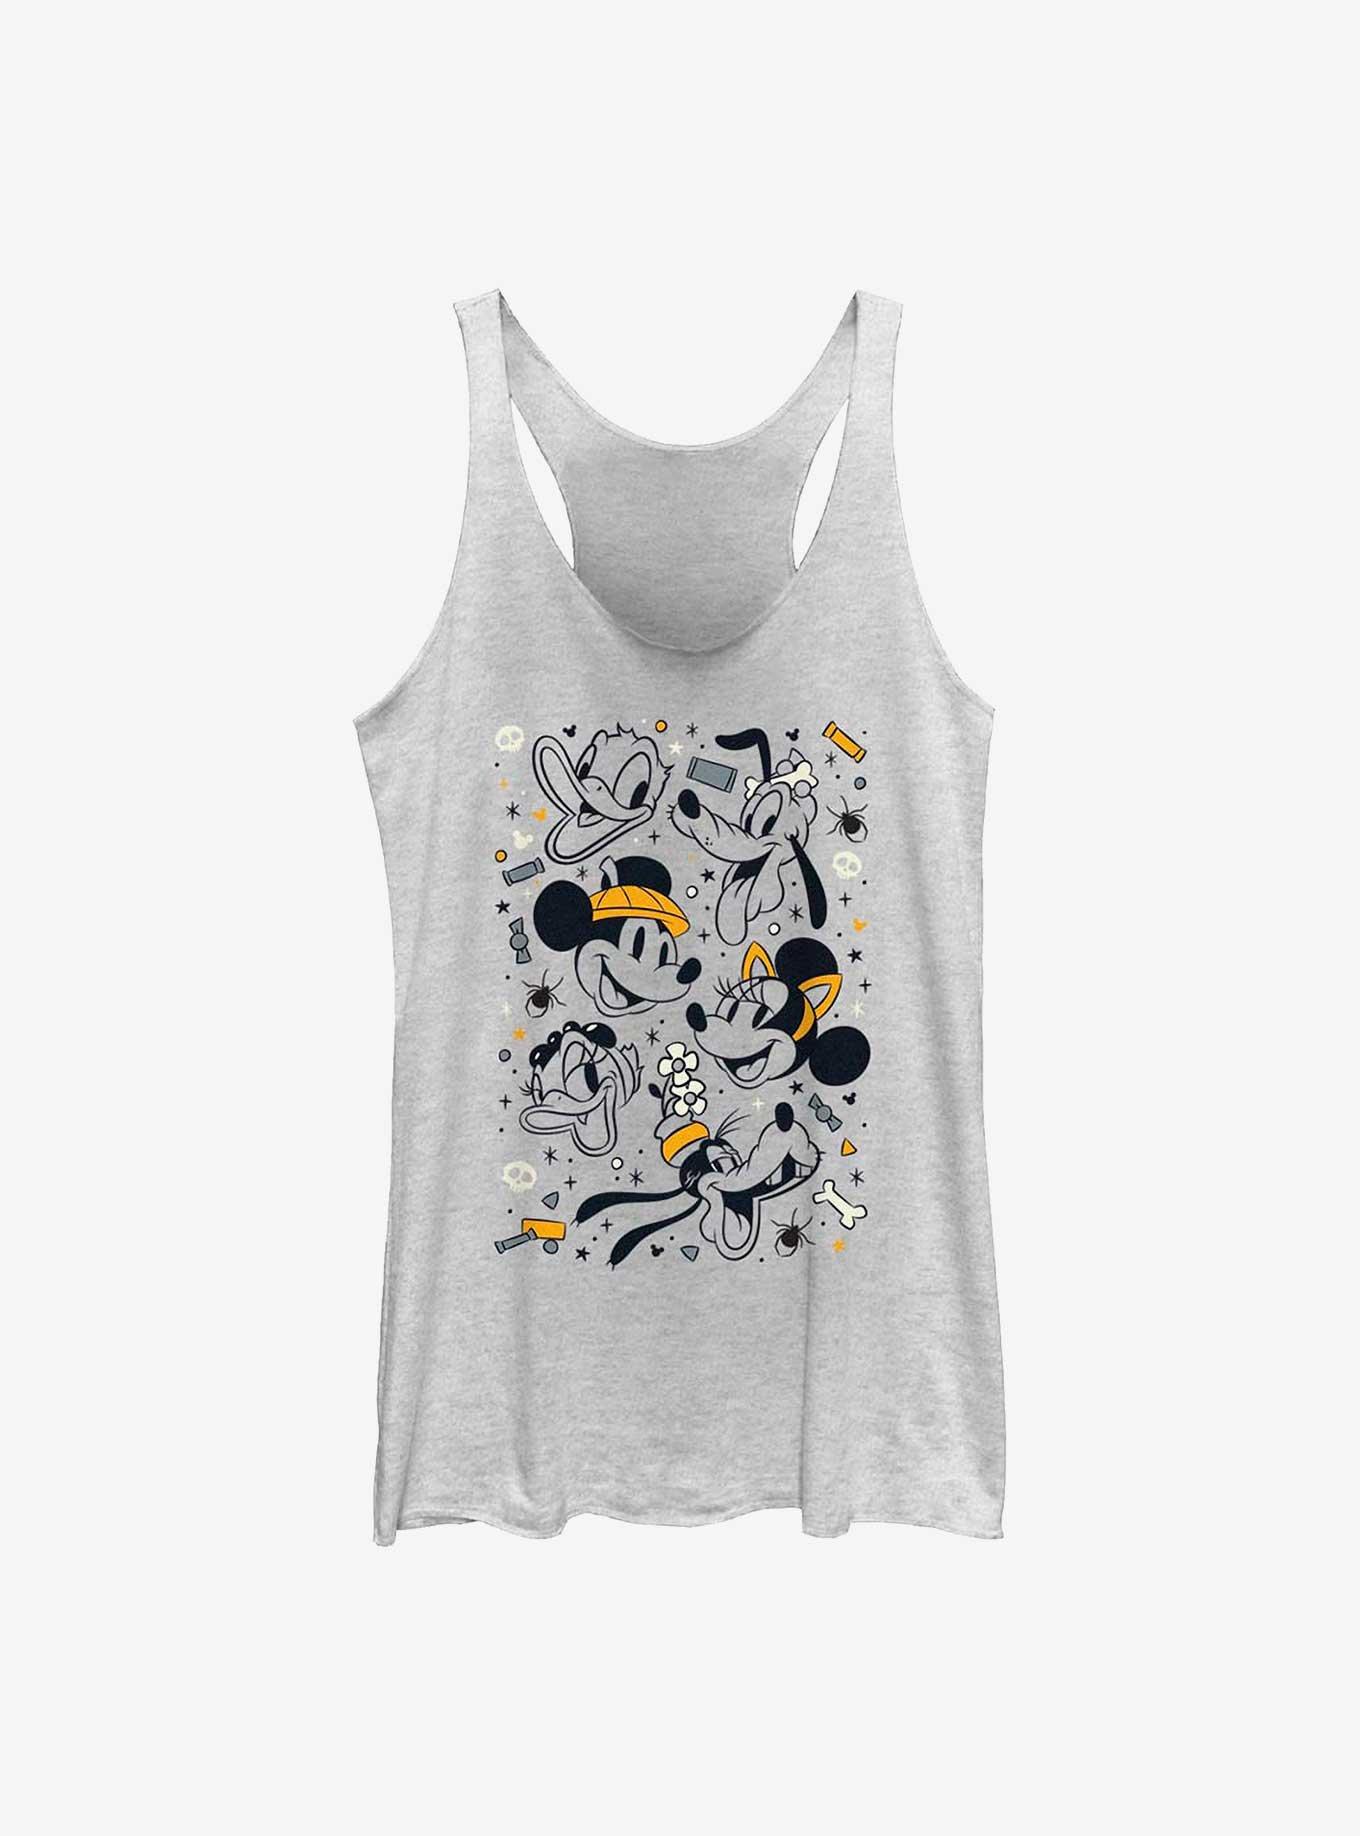 Disney Mickey Mouse & Friends Happiest Halloween Womens Tank Top - WHITE